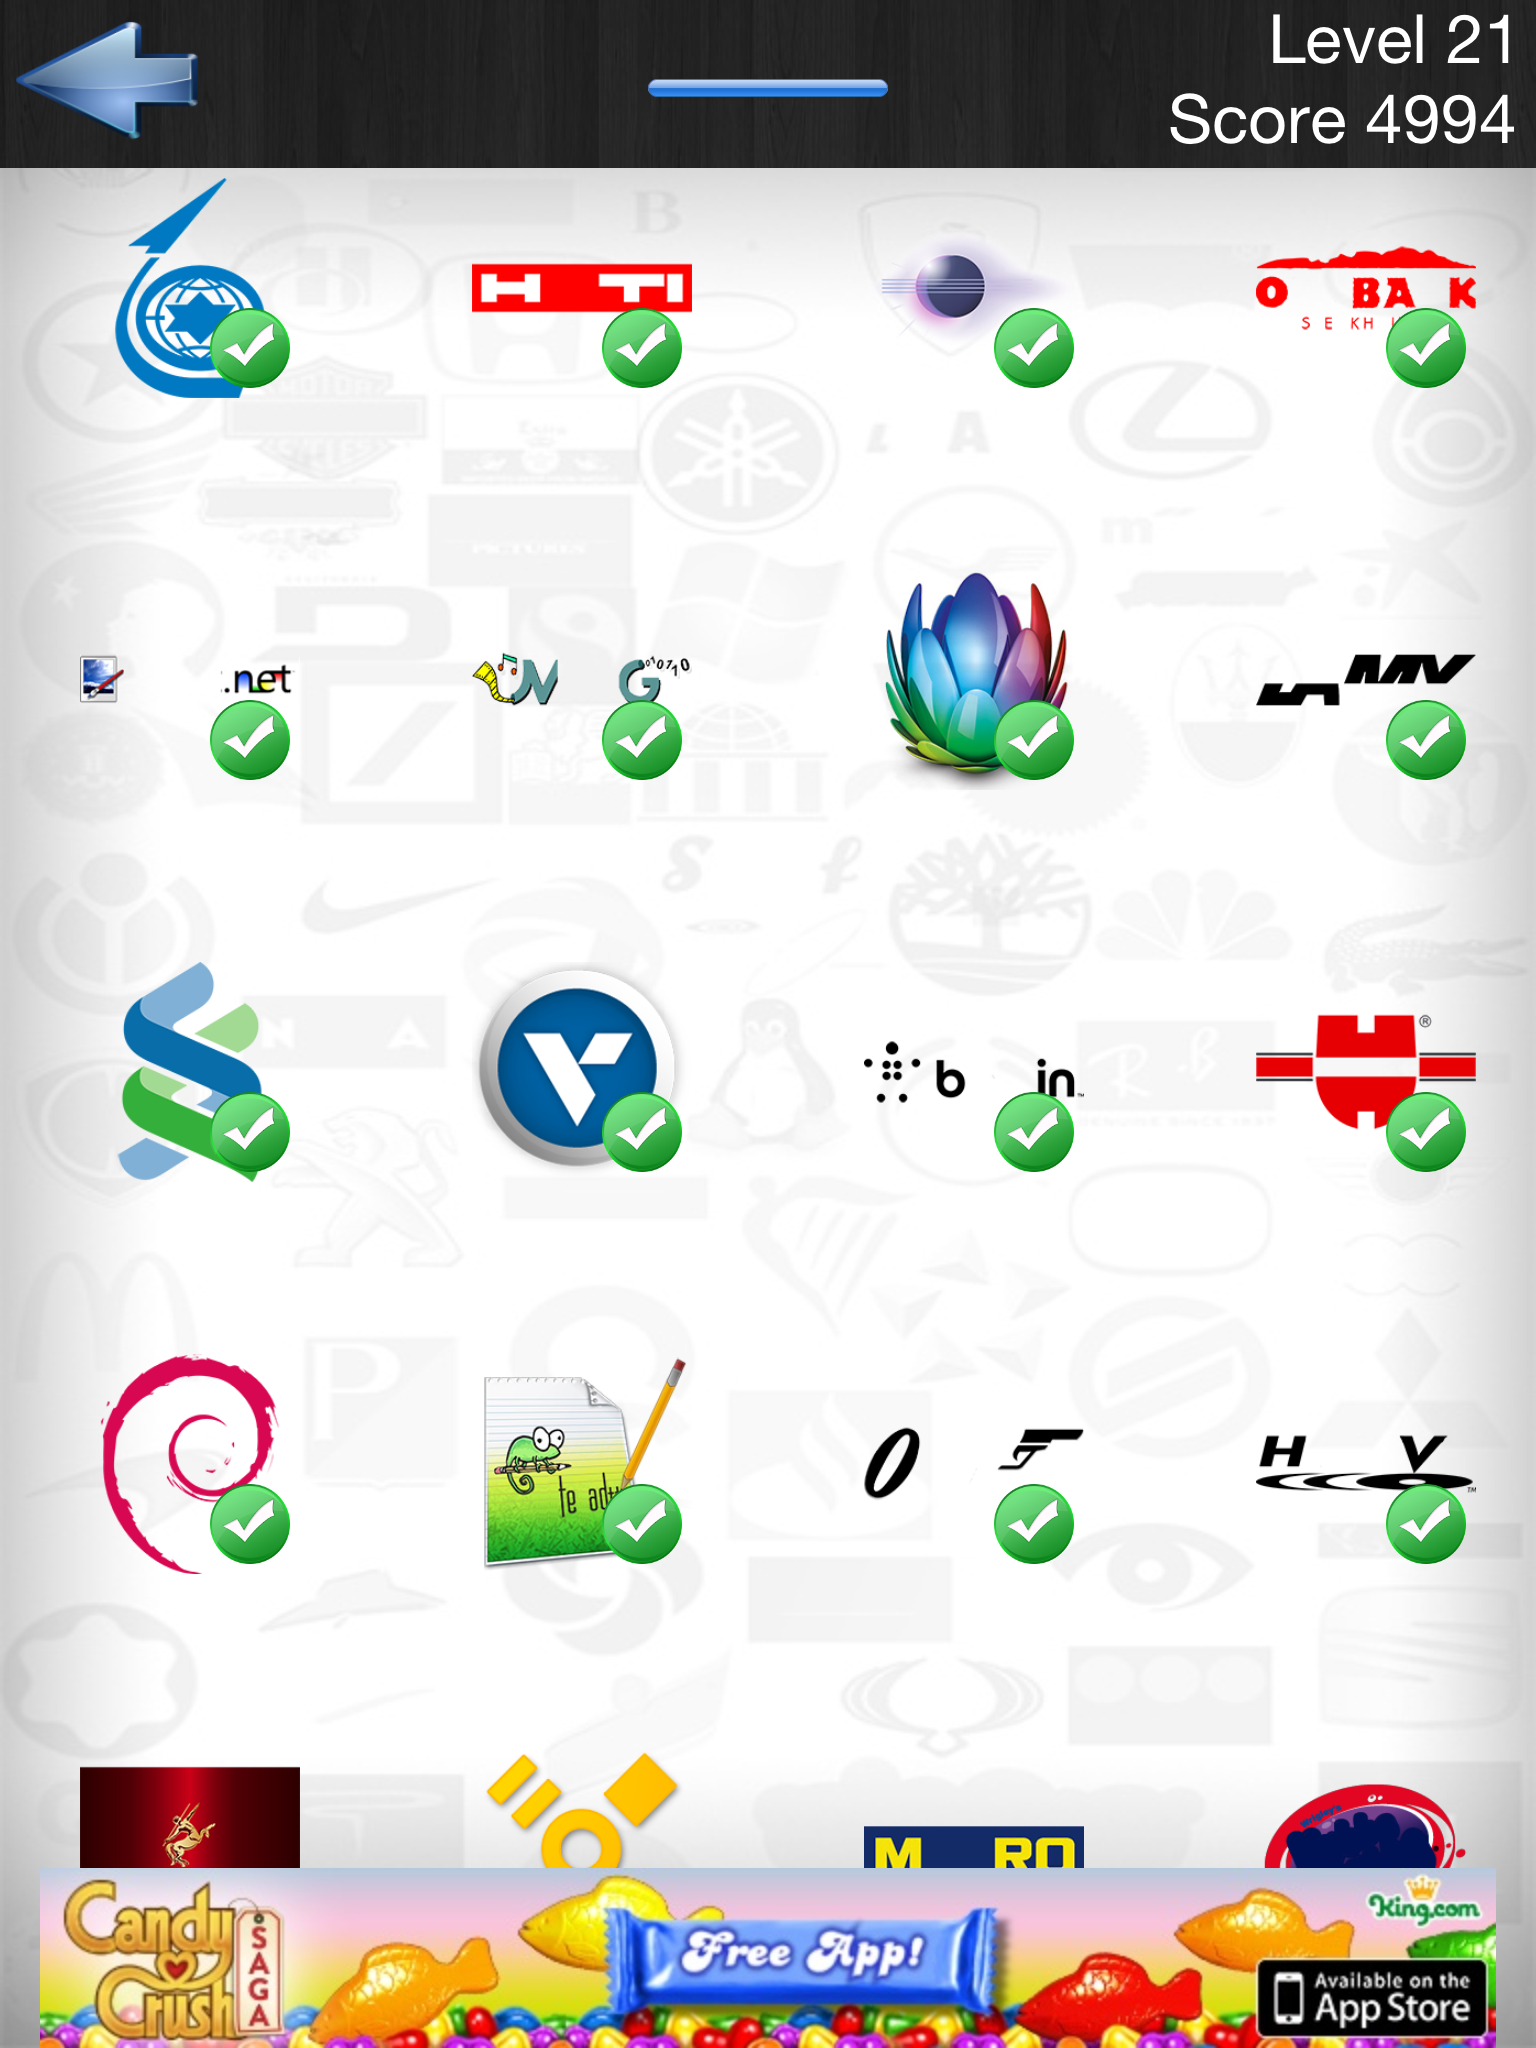 Logos Quiz Answers for iPhone, iPad, iPod, Android App